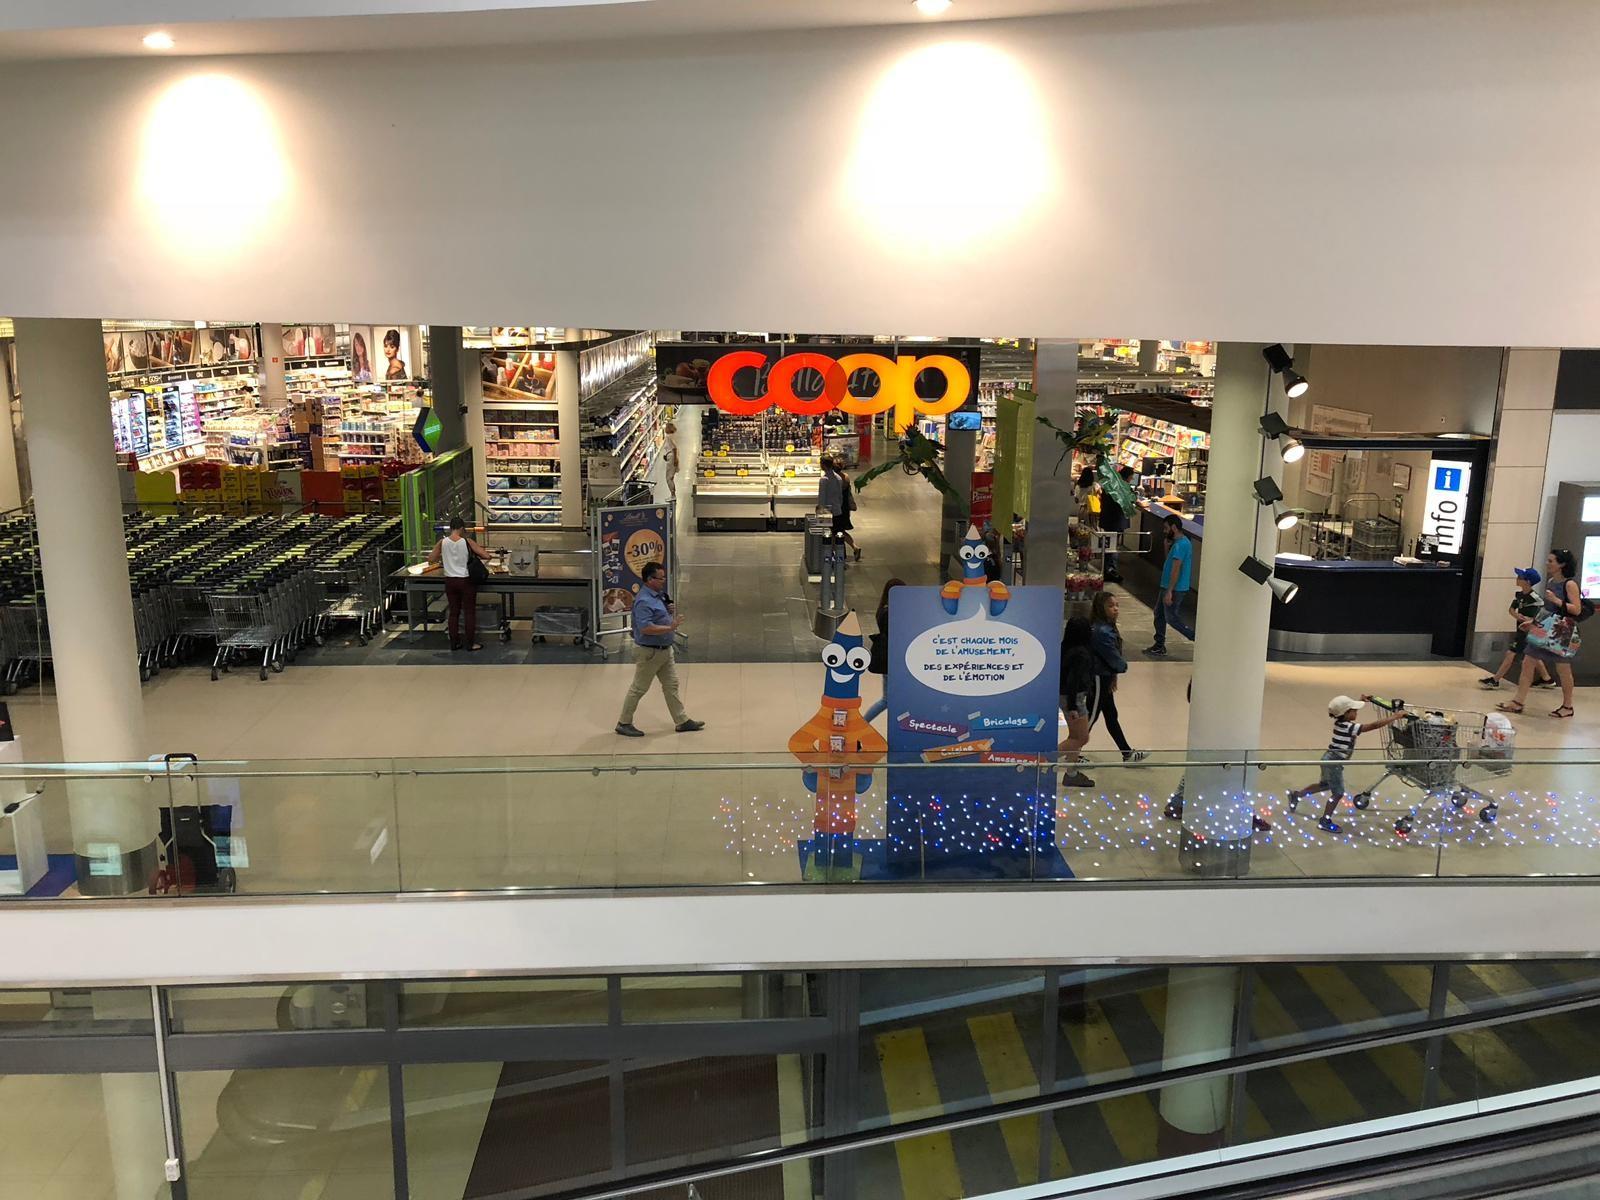 Coop sign in a shopping mall